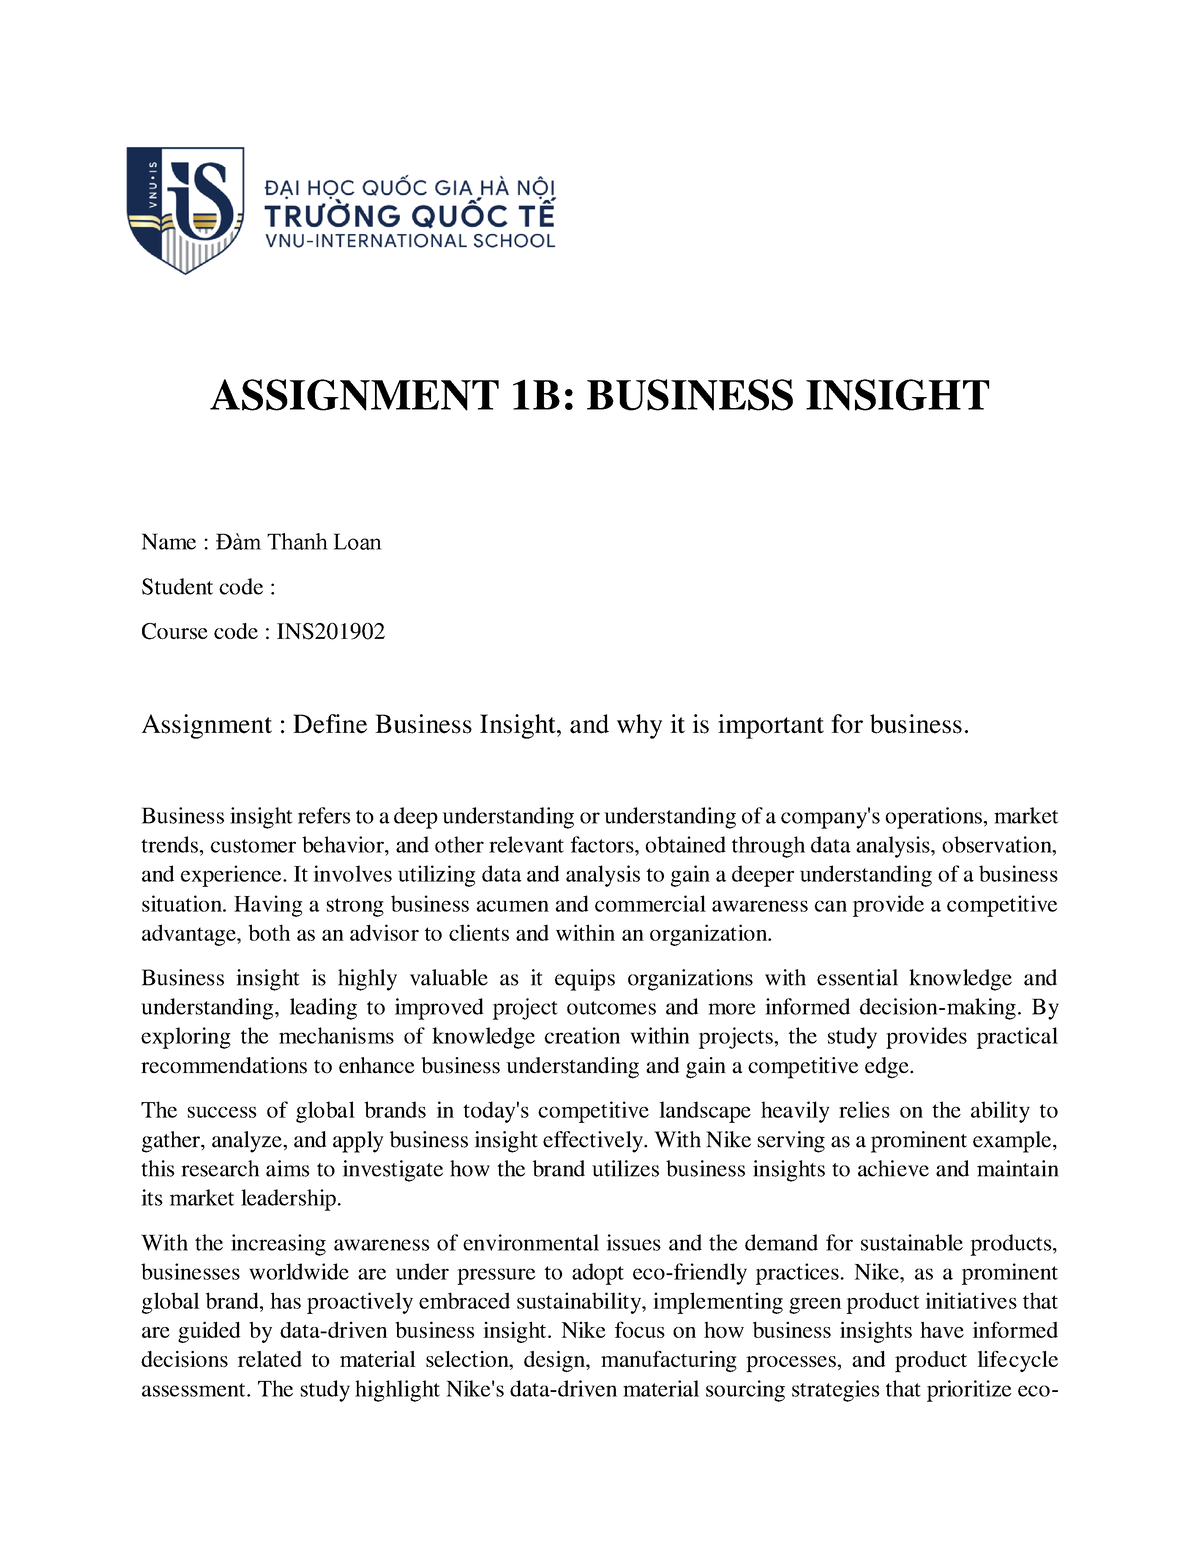 Business Insight - Business insight refers to a deep understanding or ...